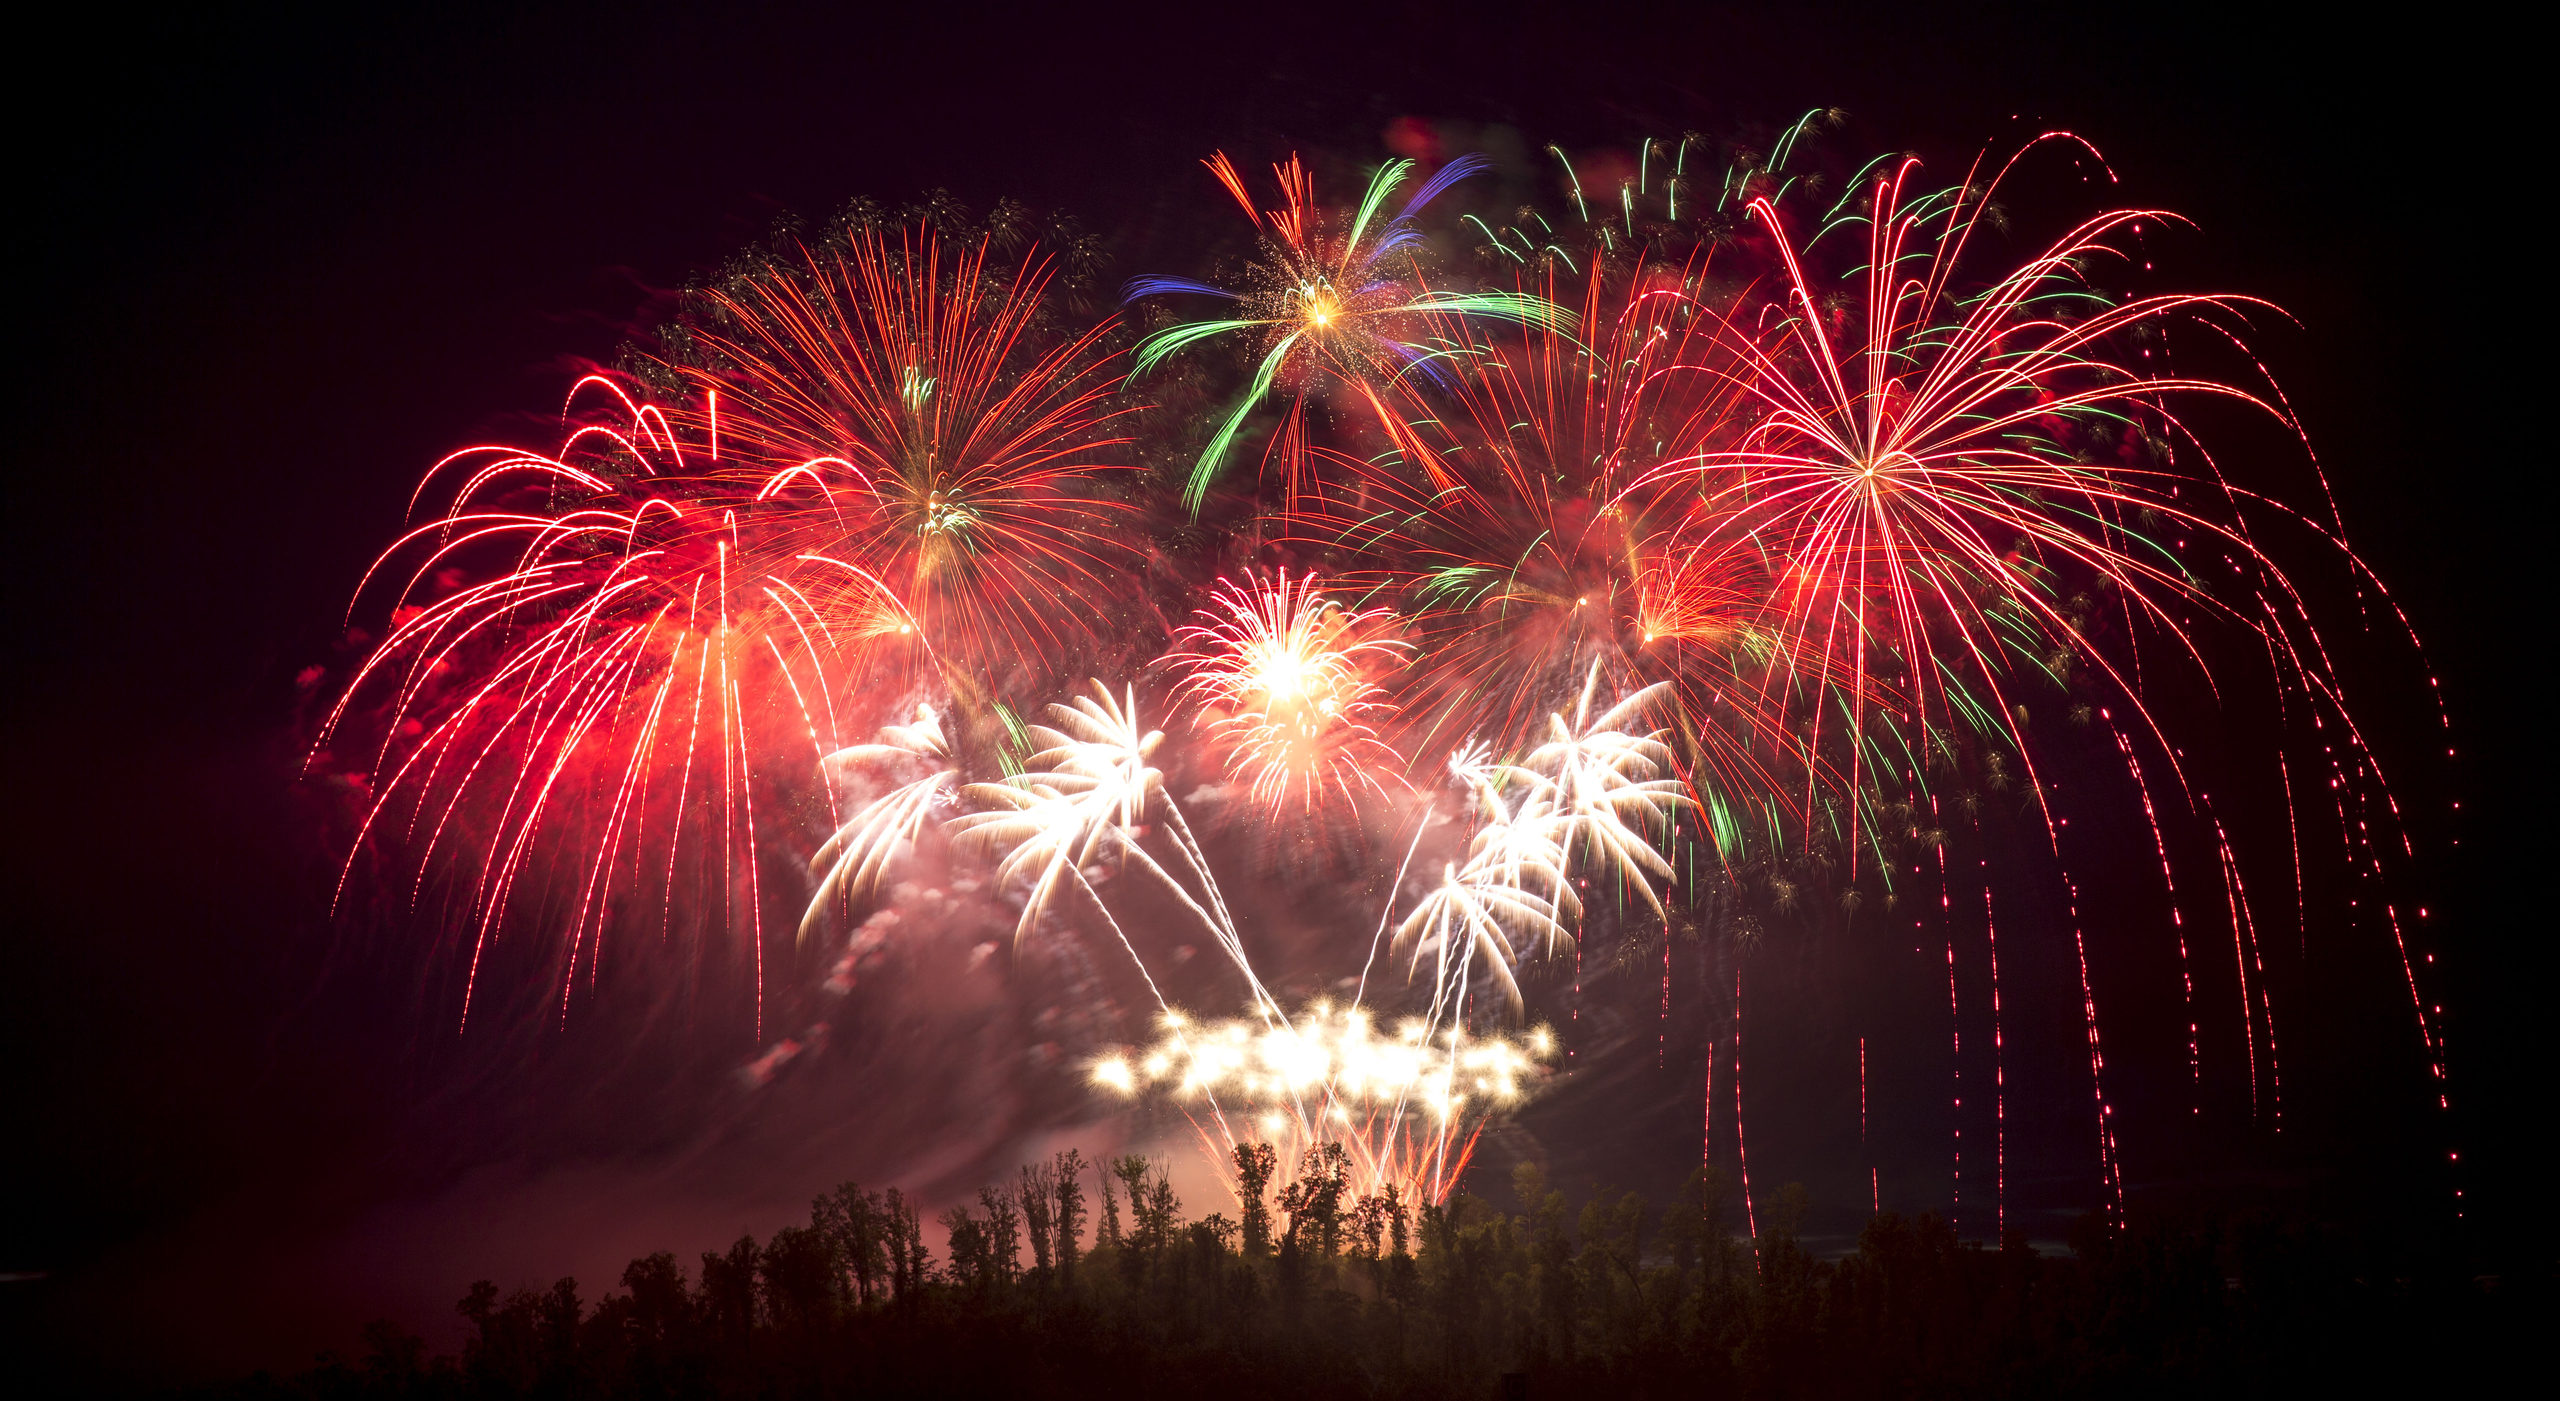 Enjoy these photos of fireworks from the National Scout Jamboree